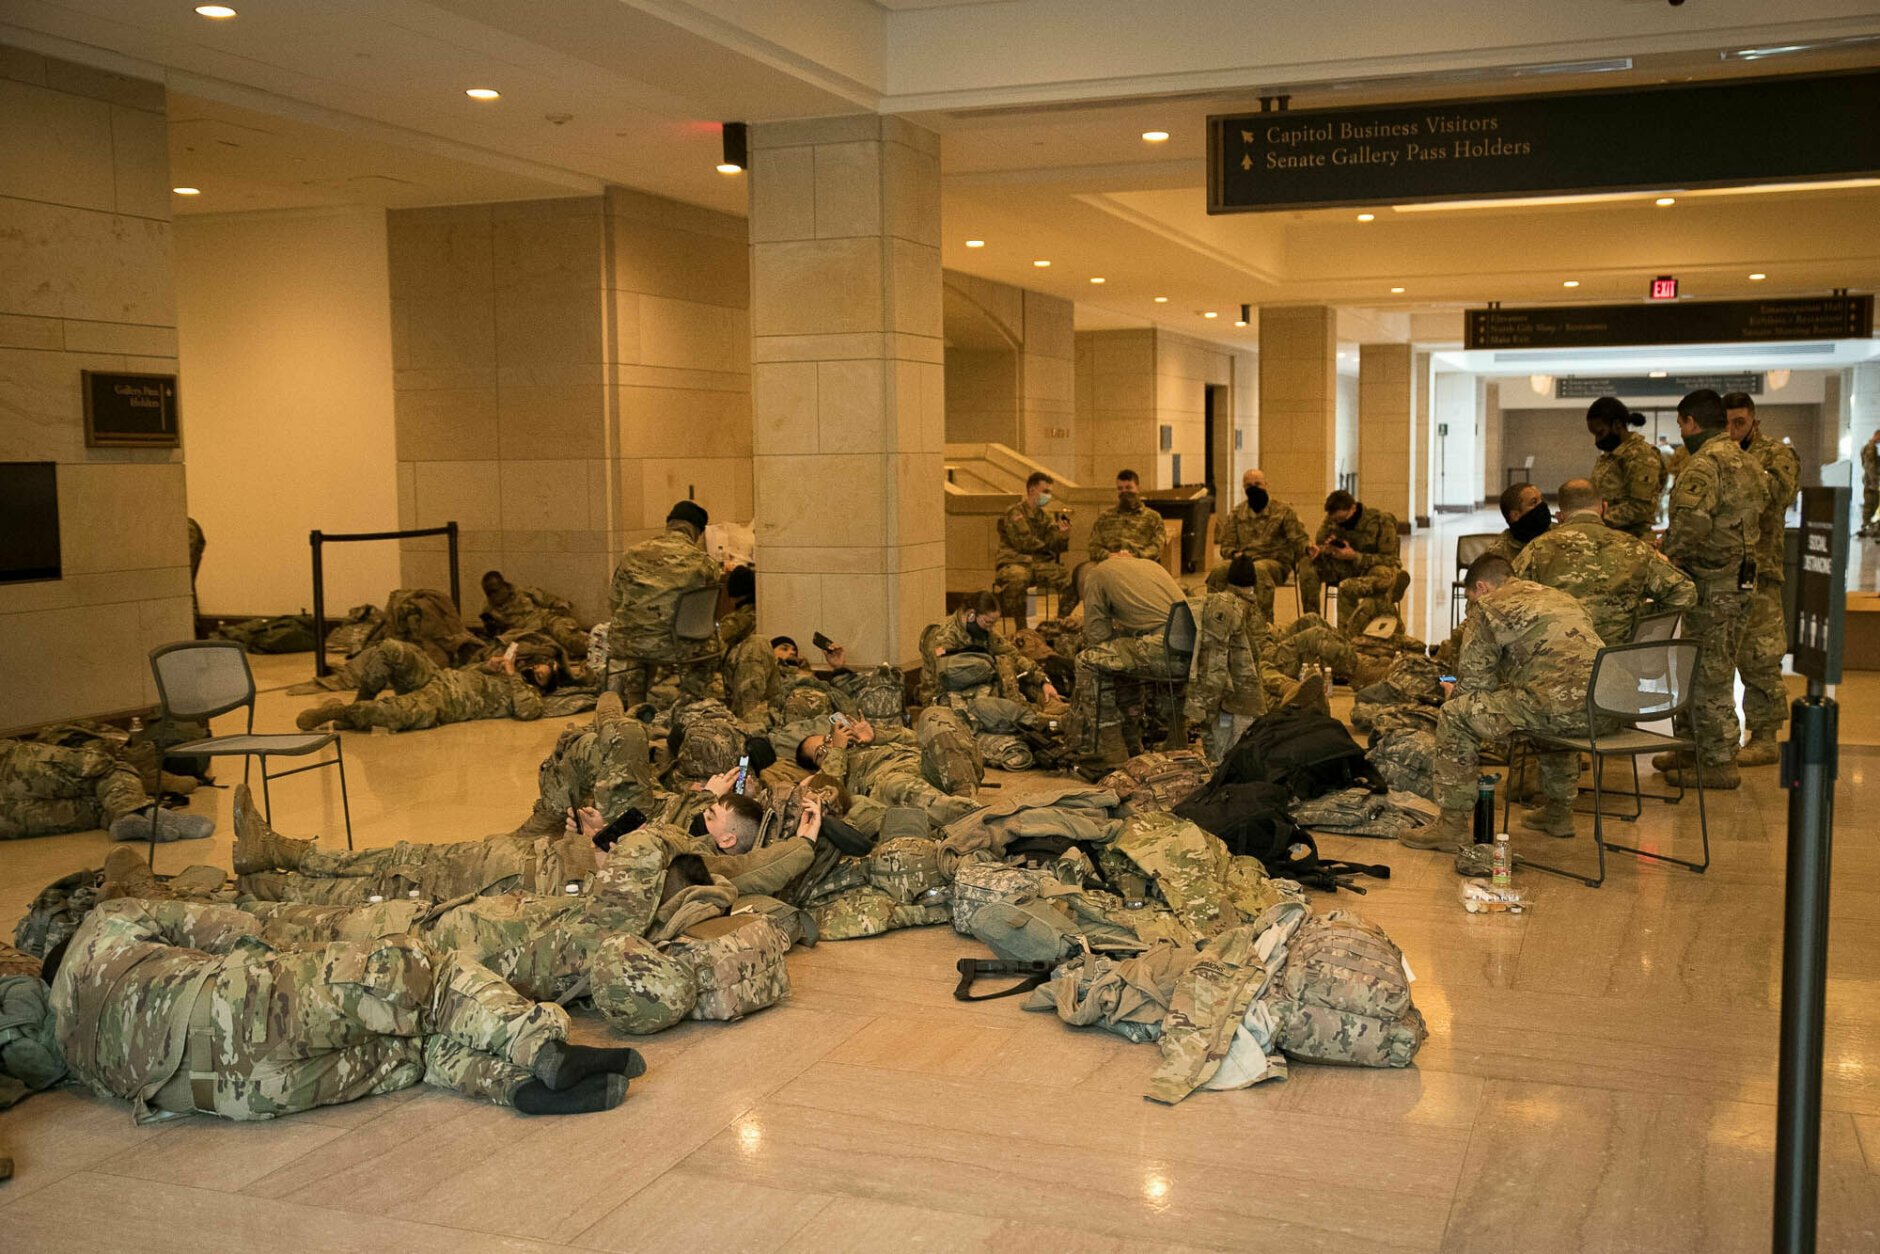 National Guard rest within the halls of the U.S. Capitol visitor center between shifts on Jan. 13, 2021. More than 20,000 armed guardsmen are expected to provide security in the nation's capital amid threats against the inauguration of President-elect Joe Biden. (WTOP/Alejandro Alvarez)